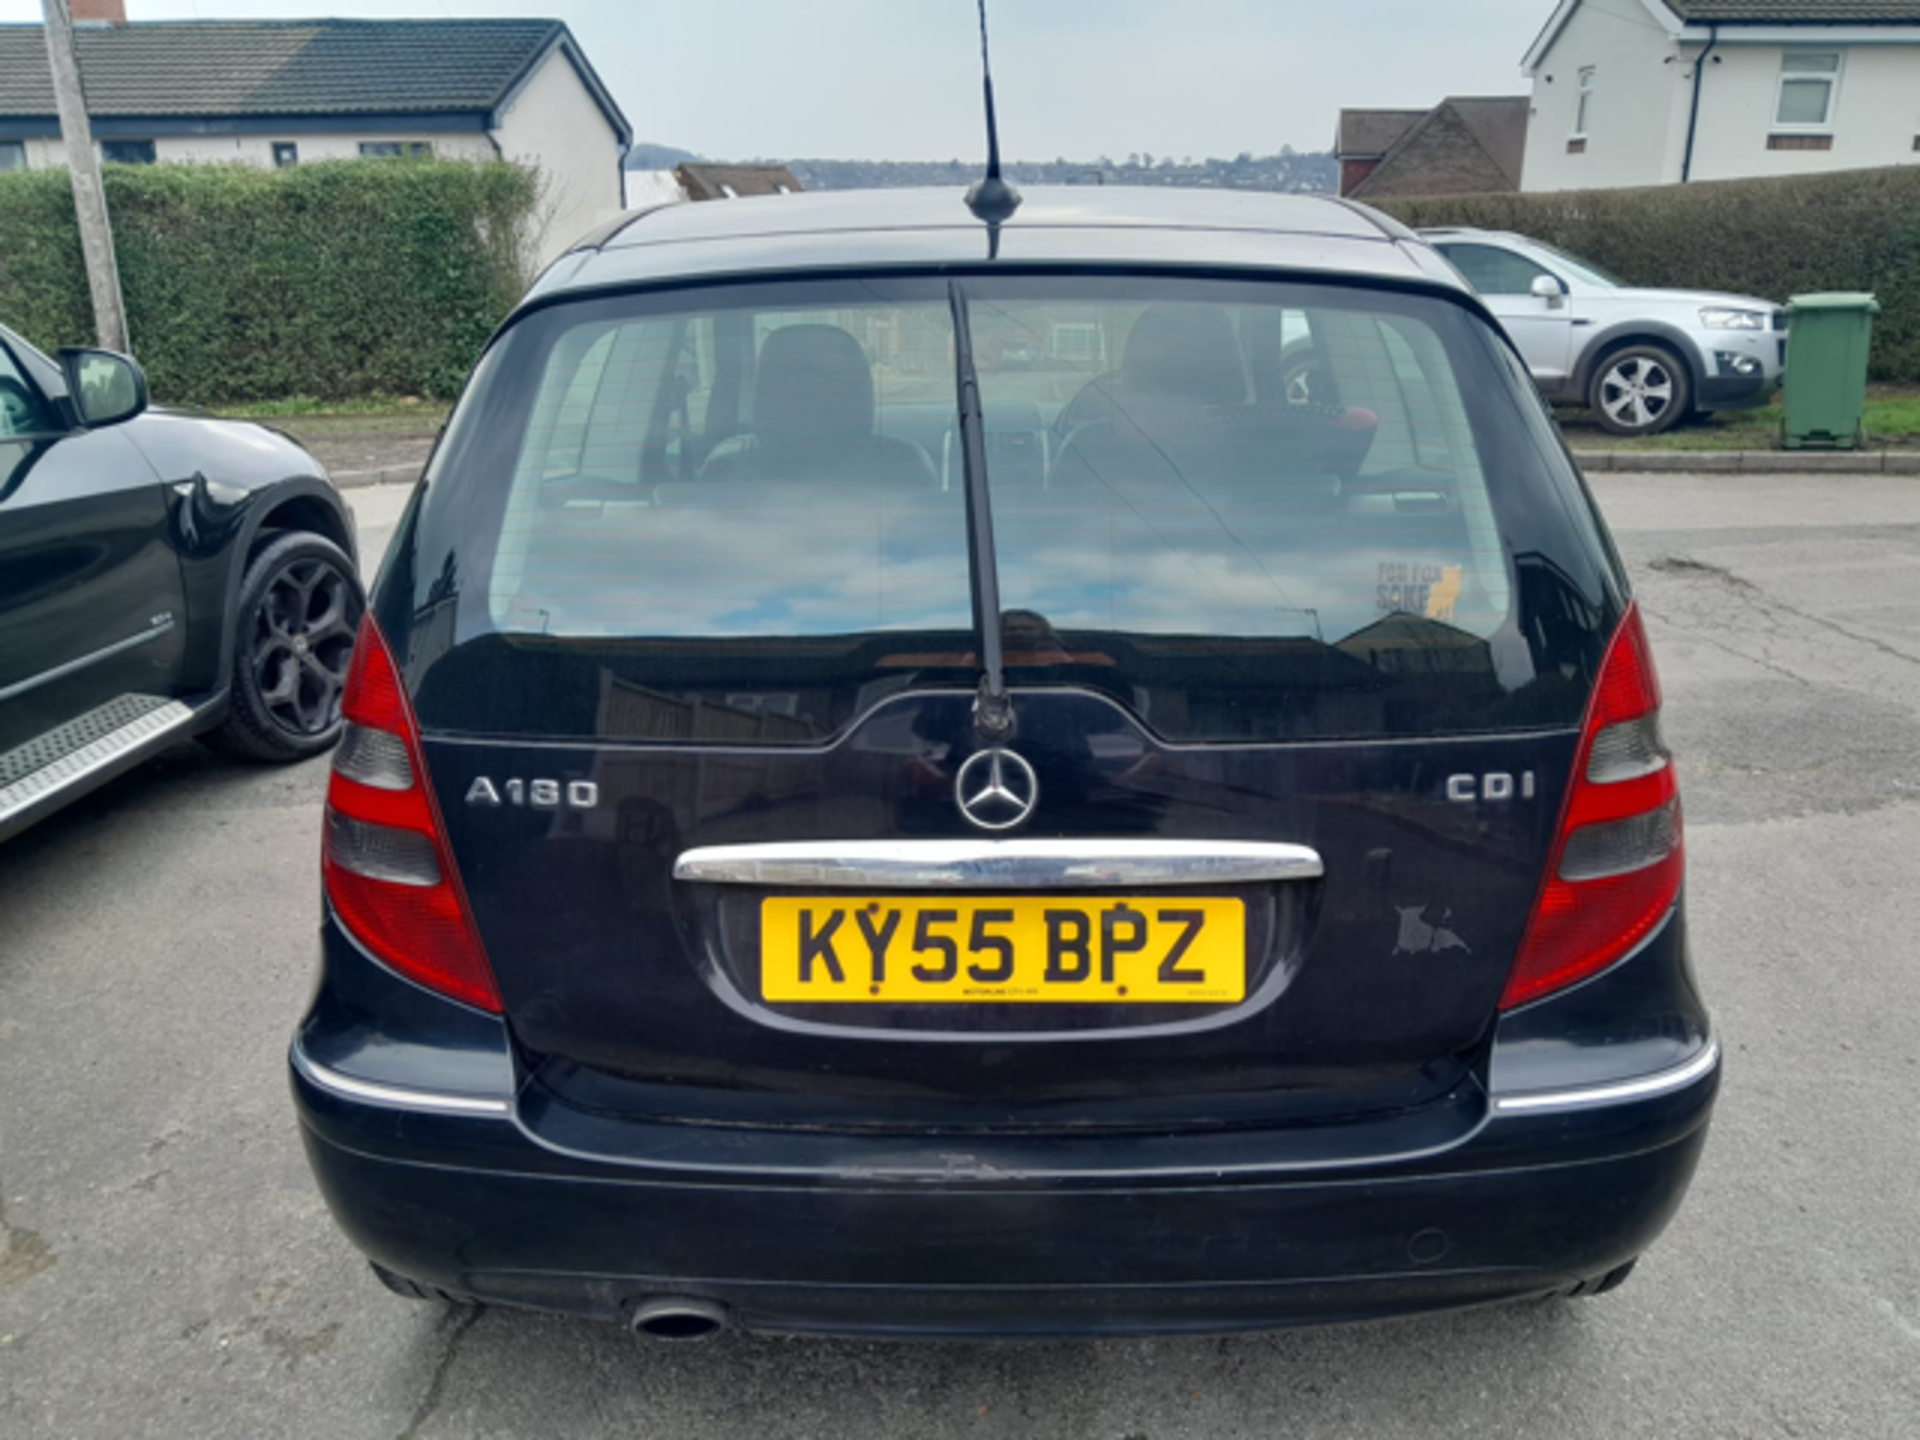 Mercedes A180 CDI, KY55 BPZ - Image 4 of 8